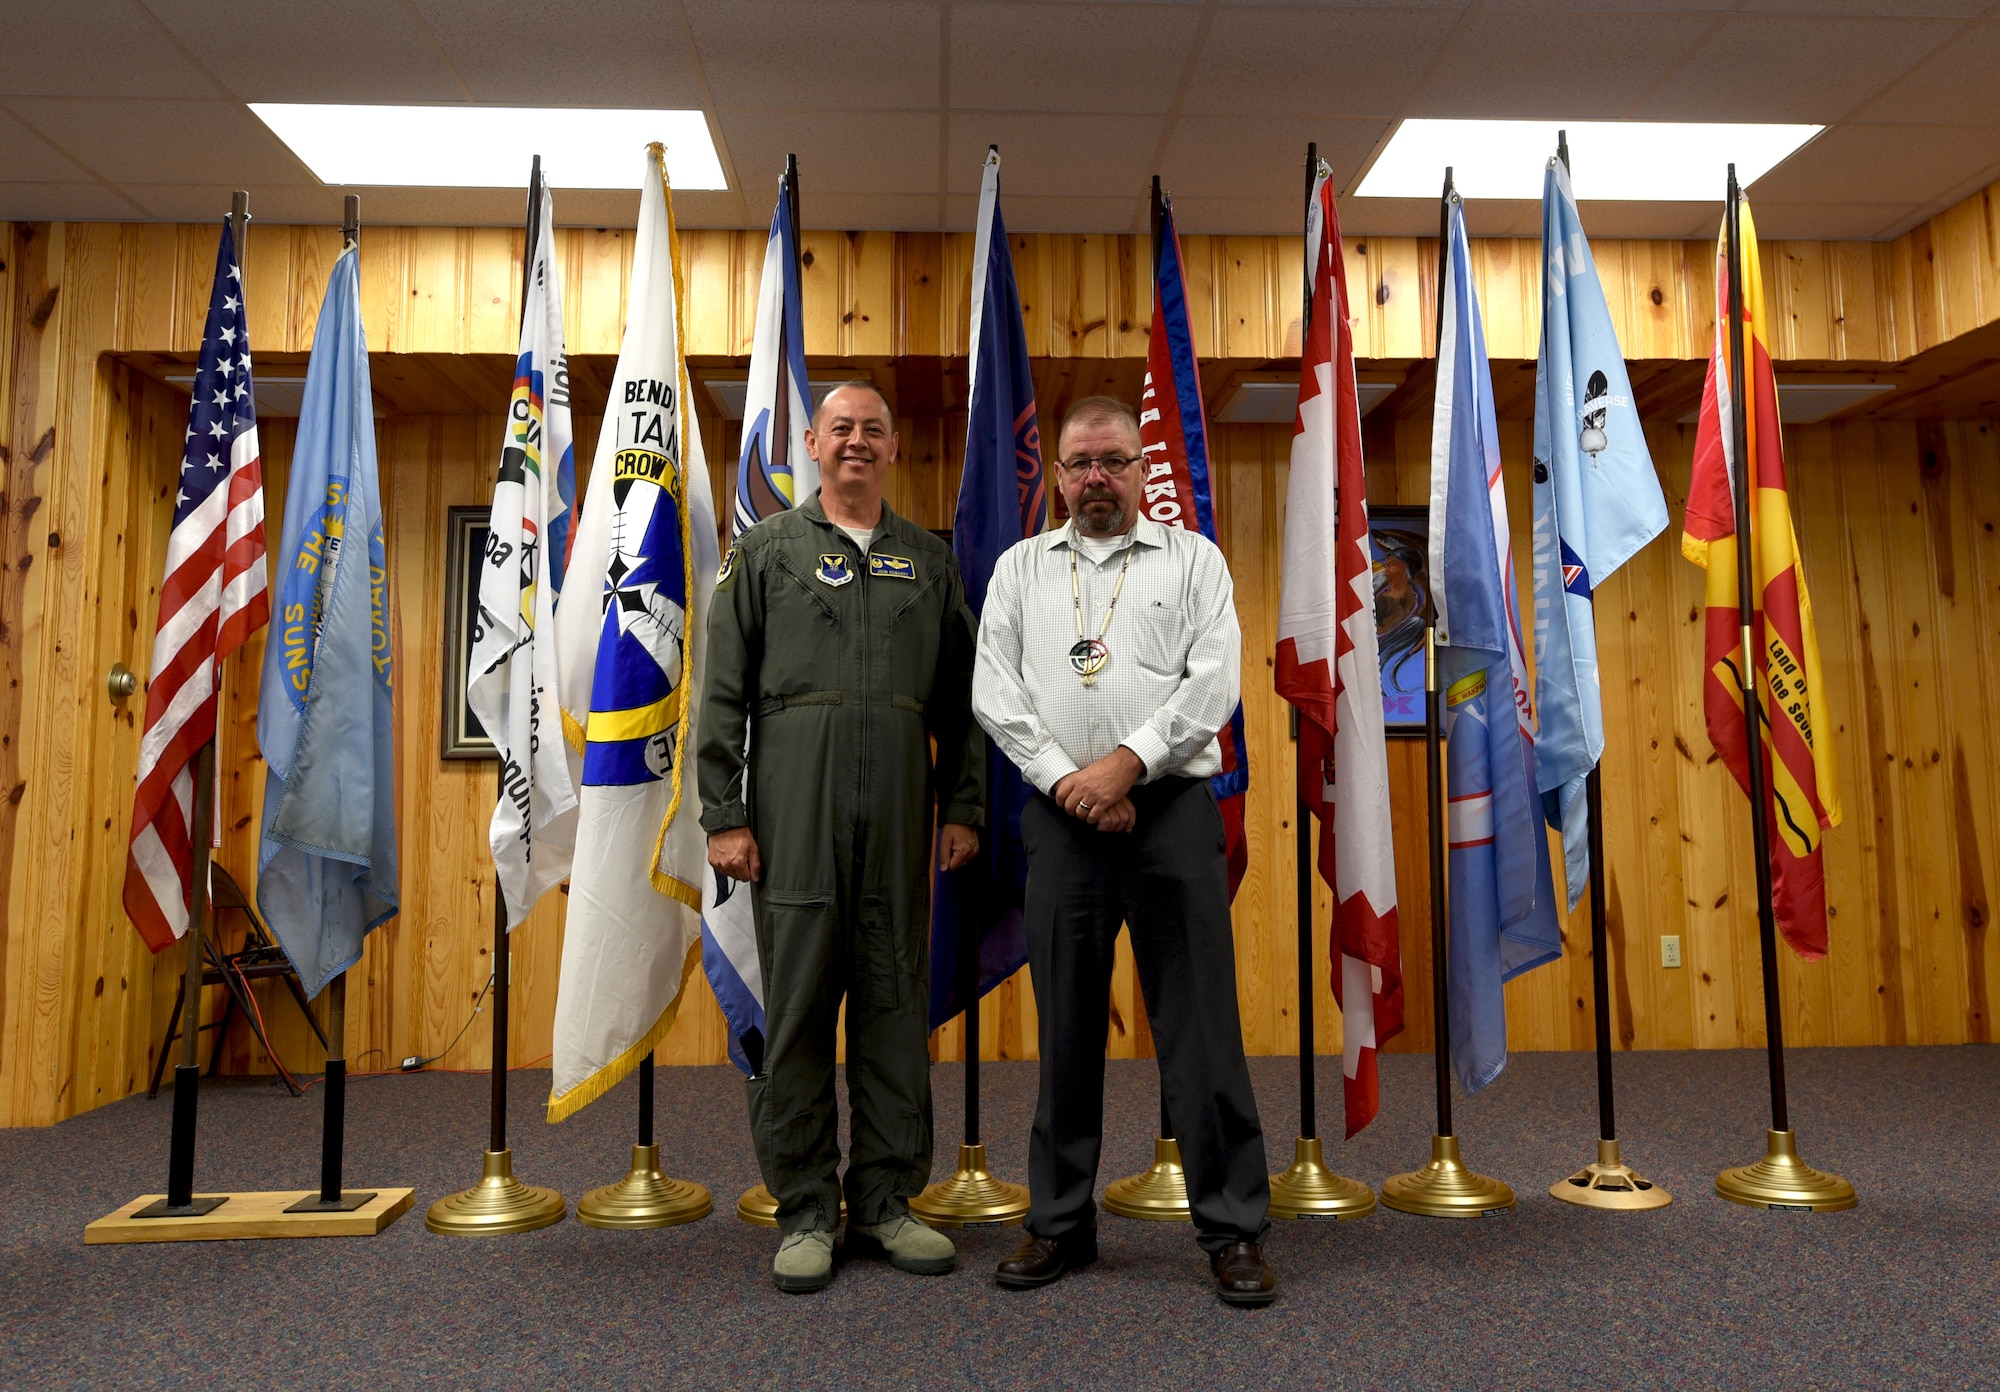 Col. John Edwards, 28th Bomb Wing commander, stands alongside Steve Emery, South Dakota’s secretary of tribal relations, at the 2018 Governors’ Interstate Indian Council assembly at the Crazy Horse Memorial in Custer County, S.D., Sept. 26. 2018. Representatives from numerous states attended the 2018 GIIC assembly to discuss issues that influence the lives of Native American people across the country. (U.S. Air Force photo by Airman Christina M. Bennett)